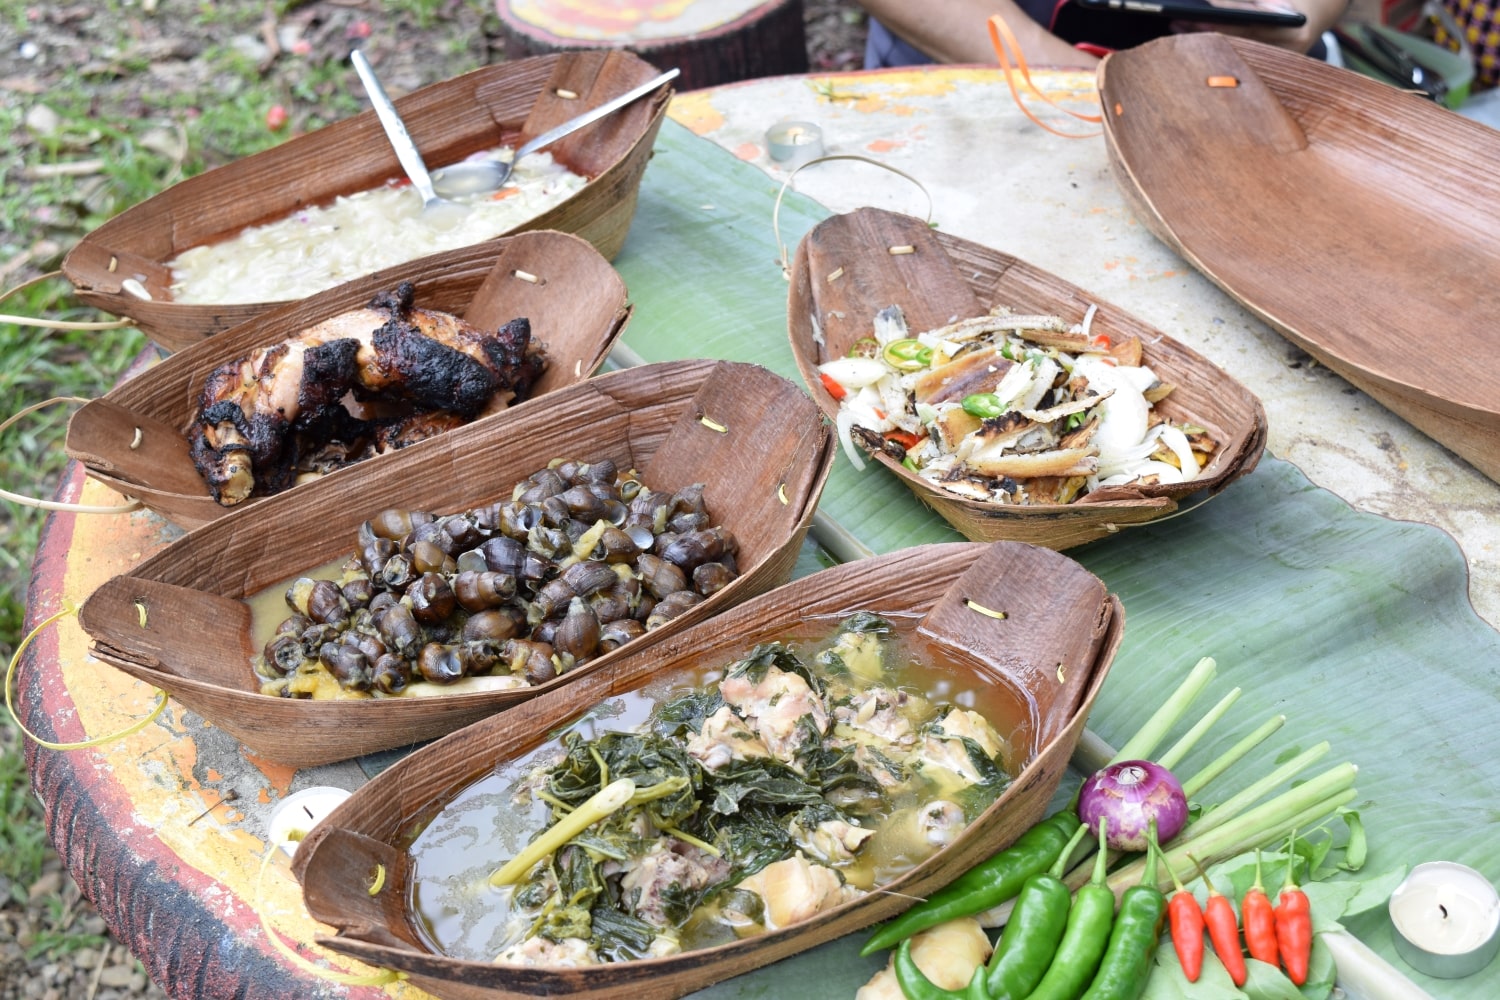 Tribal food cooked and served for lunch with Backyard Tour Malaysia